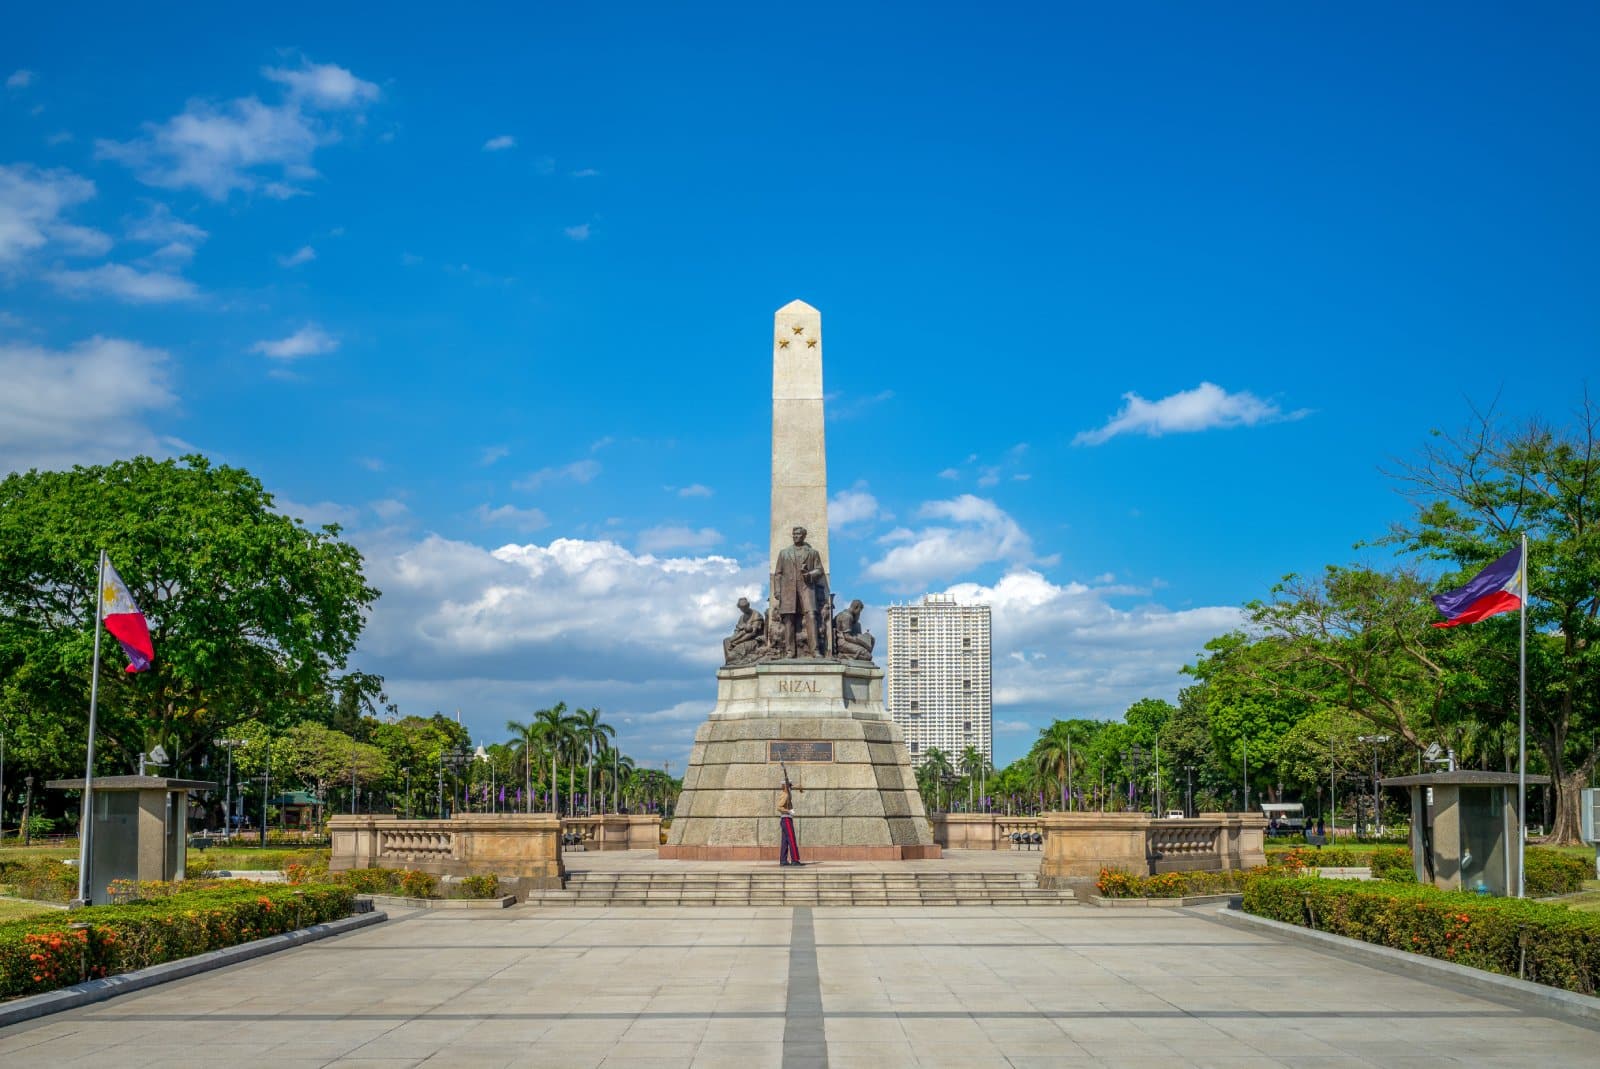 <p class="wp-caption-text">Image Credit: Shutterstock / Richie Chan</p>  <p><span>Rizal Park, also known as Luneta Park, is a historical urban park in the heart of Manila, Philippines. Spanning approximately 58 hectares, it is one of the largest urban parks in Asia. Named after Dr. José Rizal, the Philippines’ national hero, the park commemorates his execution in 1896, a pivotal moment in the Philippine Revolution against Spanish colonial rule. The park’s centerpiece is the Rizal Monument, which contains the hero’s remains and symbolizes Filipino nationalism and bravery.</span></p> <p><span>Established in the early 1820s as an open space, Rizal Park has become a significant cultural and historical landmark. It serves multiple functions: a leisure and recreational space for residents and tourists, a ceremonial and symbolic venue for national events, and a beautifully green oasis amidst the urban landscape of Manila.</span></p> <p><span>The park features well-manicured gardens, historical markers, museums, an open-air concert hall, and monuments dedicated to other Filipino heroes and historical events. Notable attractions within the park include the National Museum of the Philippines, the National Library, the Planetarium, and the beautifully landscaped Japanese and Chinese Gardens.</span></p>